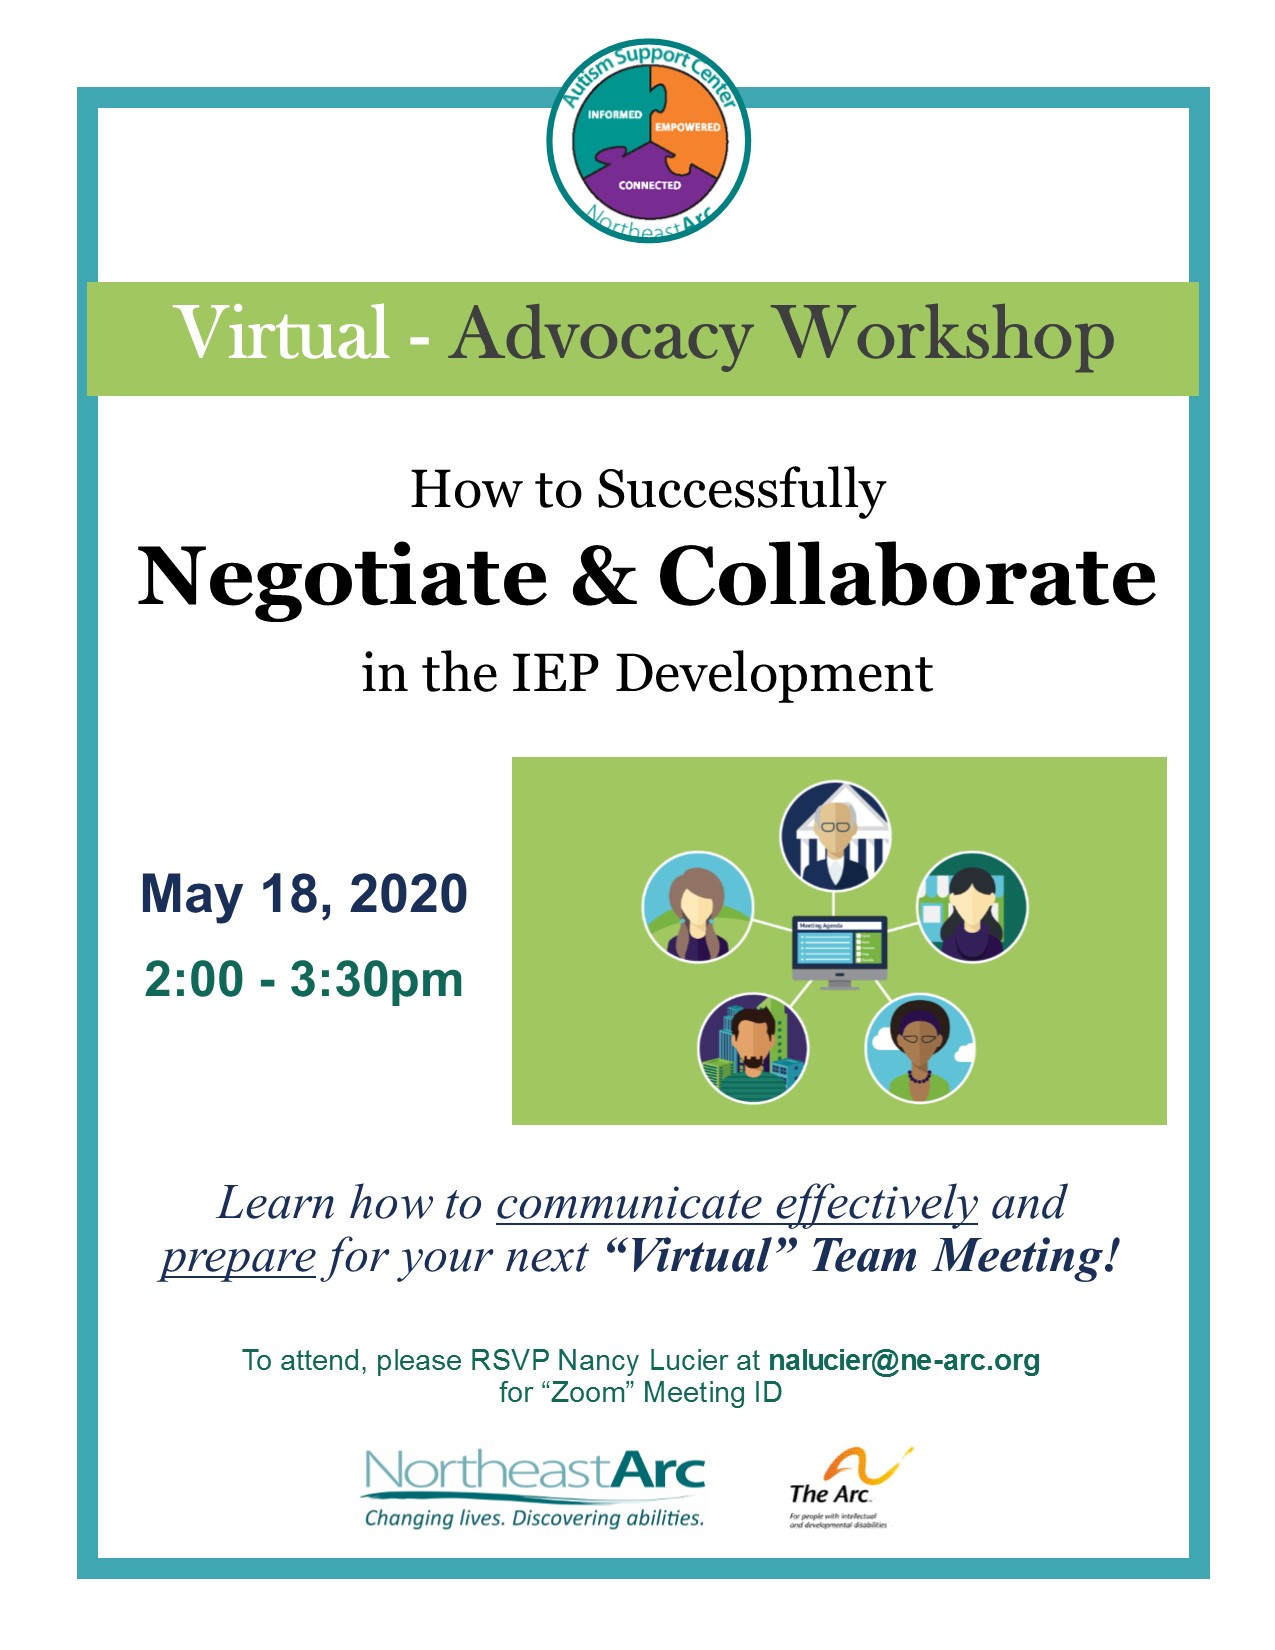 Flyer for Virtual Advocacy Workshop on how to successfully Negotiate and Collaborate